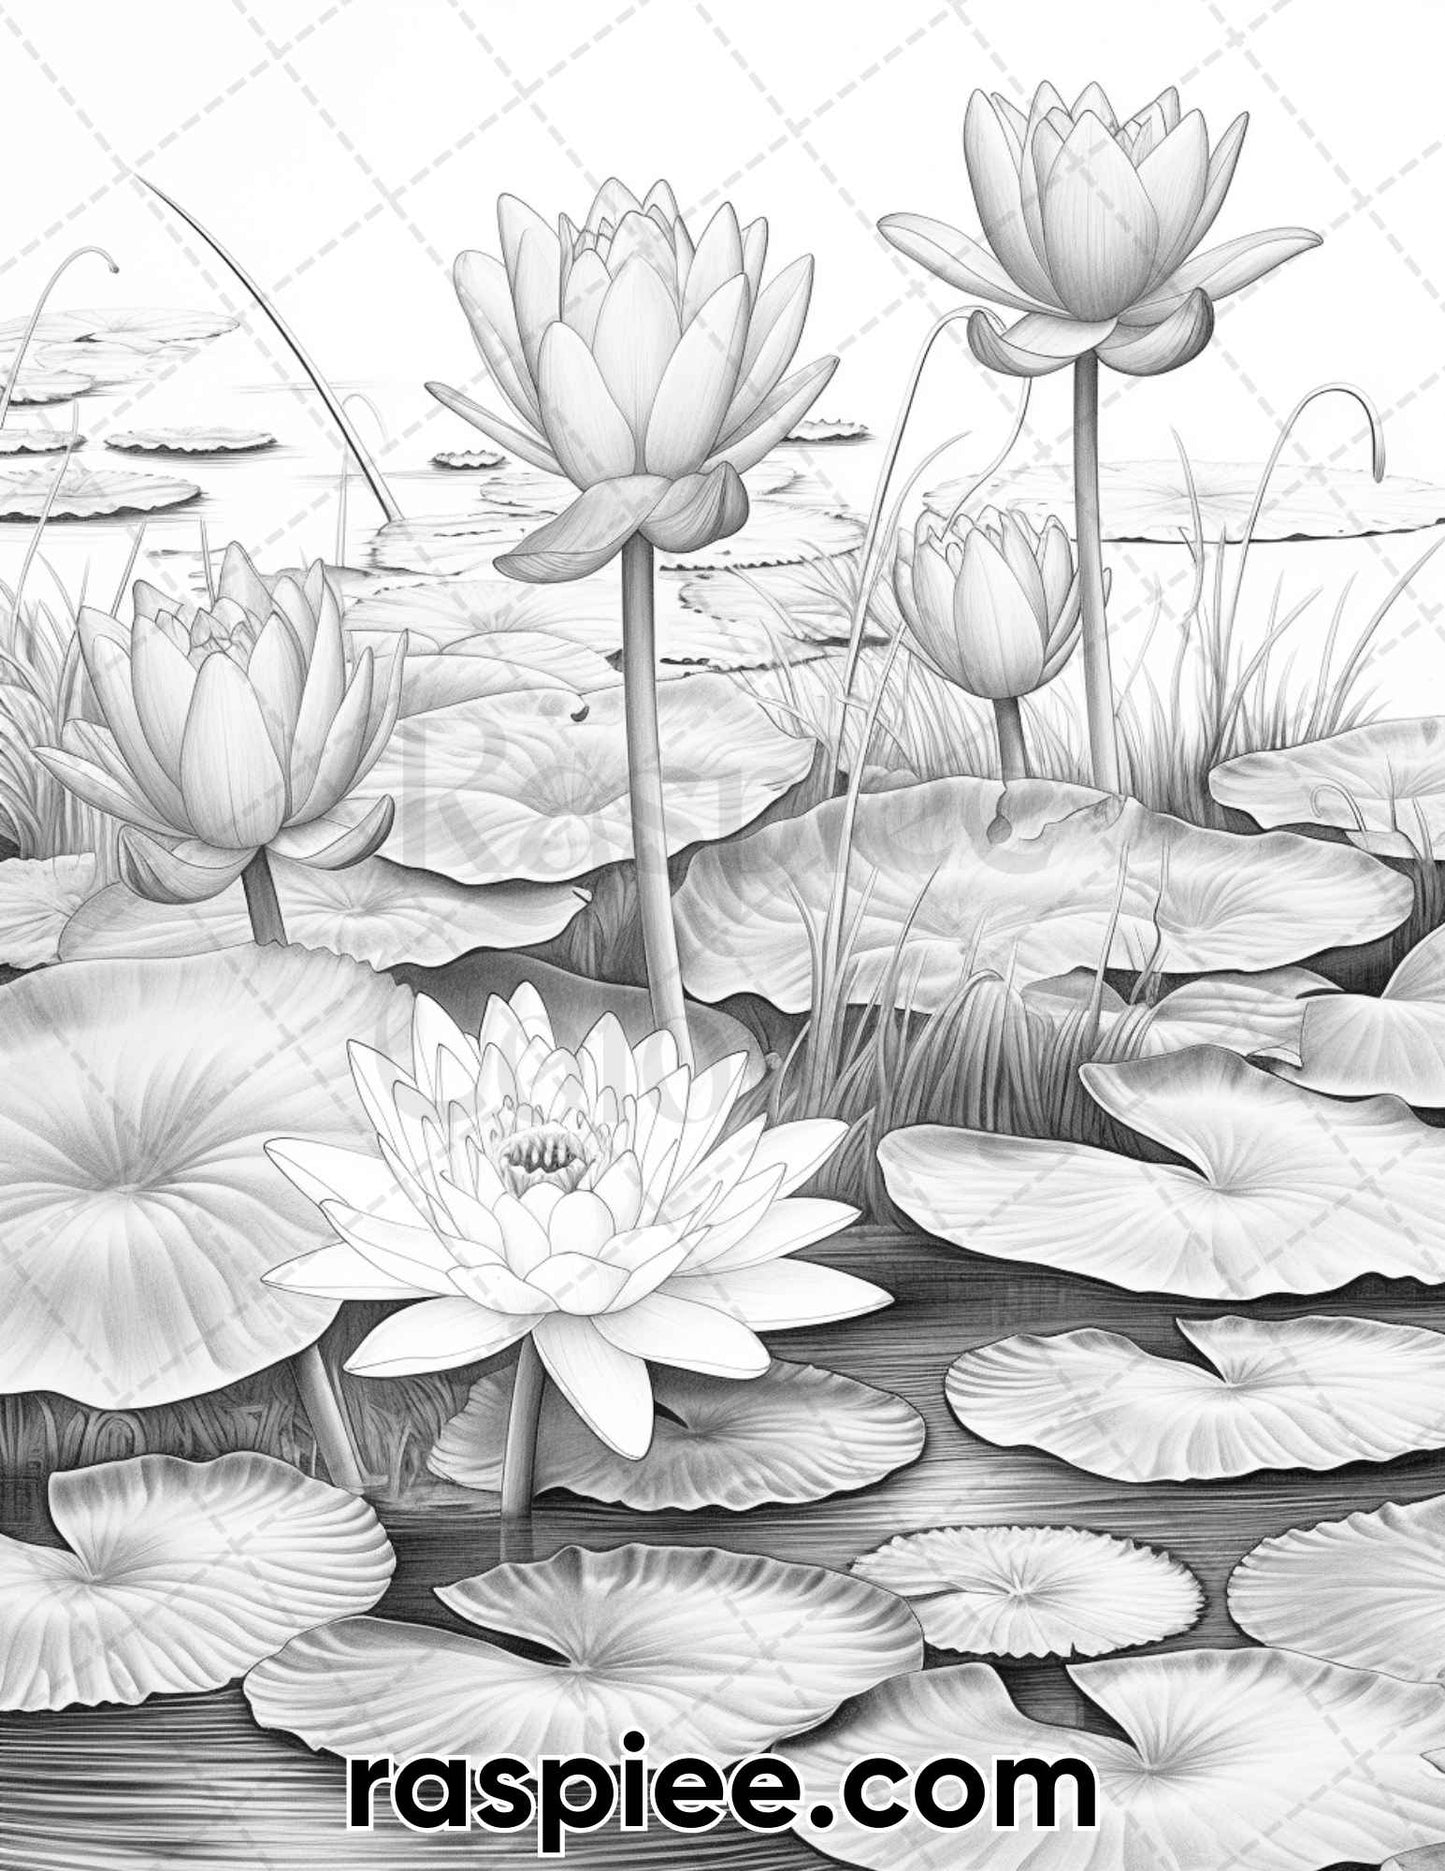 adult coloring pages, adult coloring sheets, adult coloring book pdf, adult coloring book printable, grayscale coloring pages, grayscale coloring books, spring coloring pages for adults, spring coloring book, flower coloring pages for adults, lotus pond coloring pages, flower coloring book, summer coloring pages